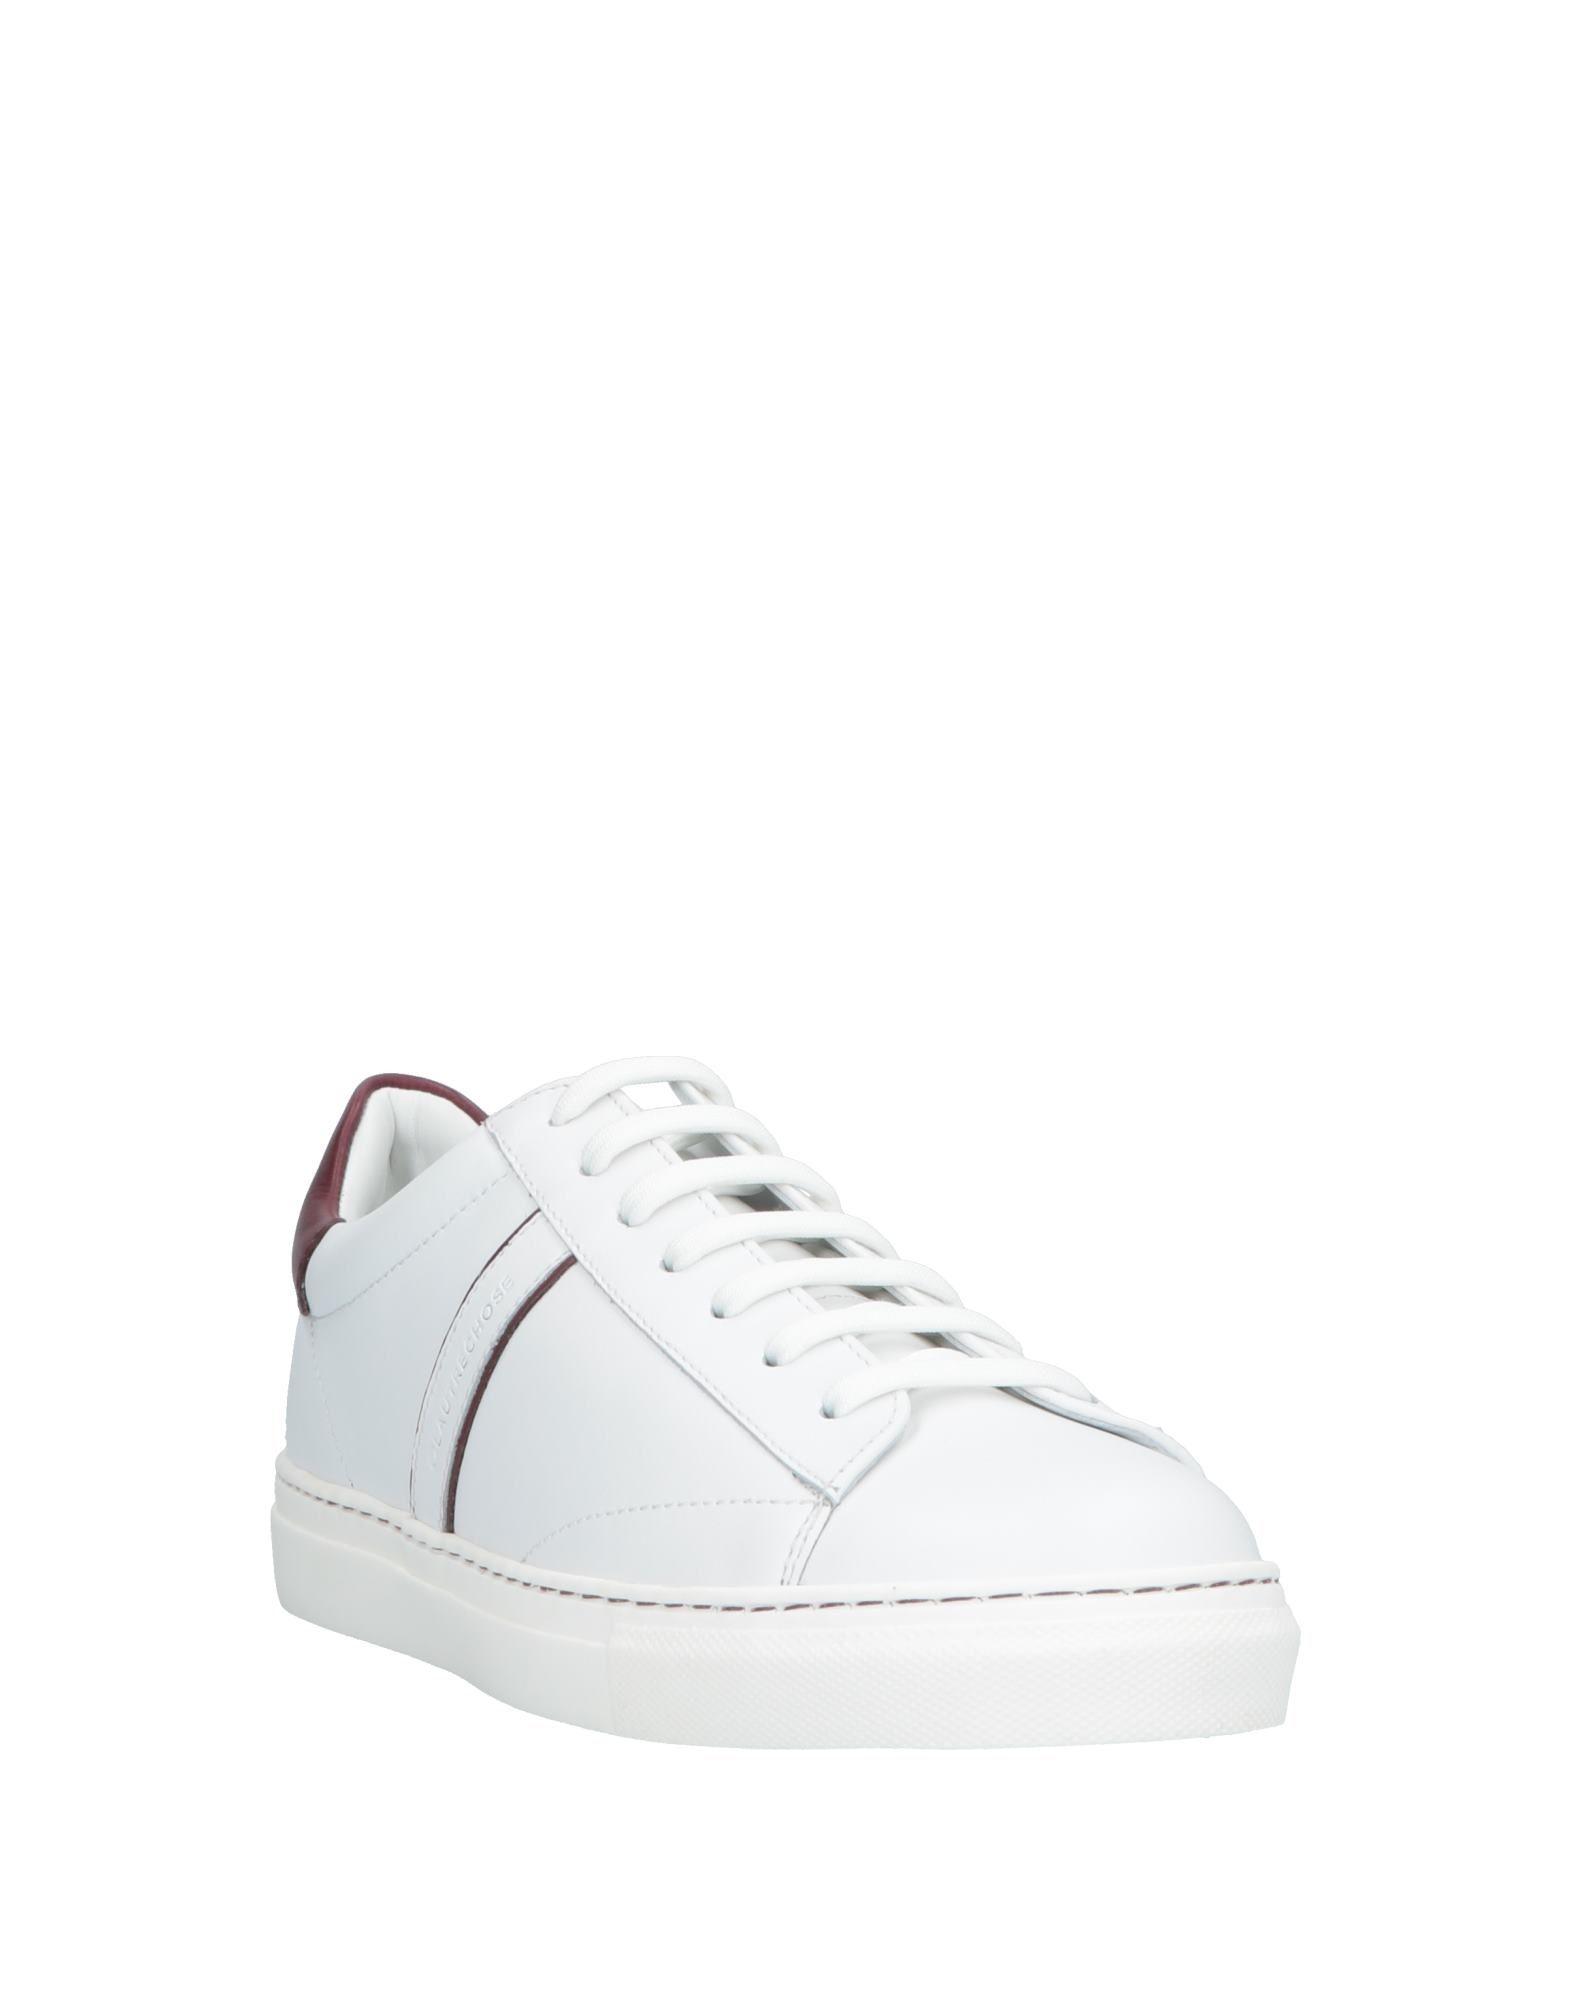 L'Autre Chose Leather Low-tops & Sneakers in White - Lyst